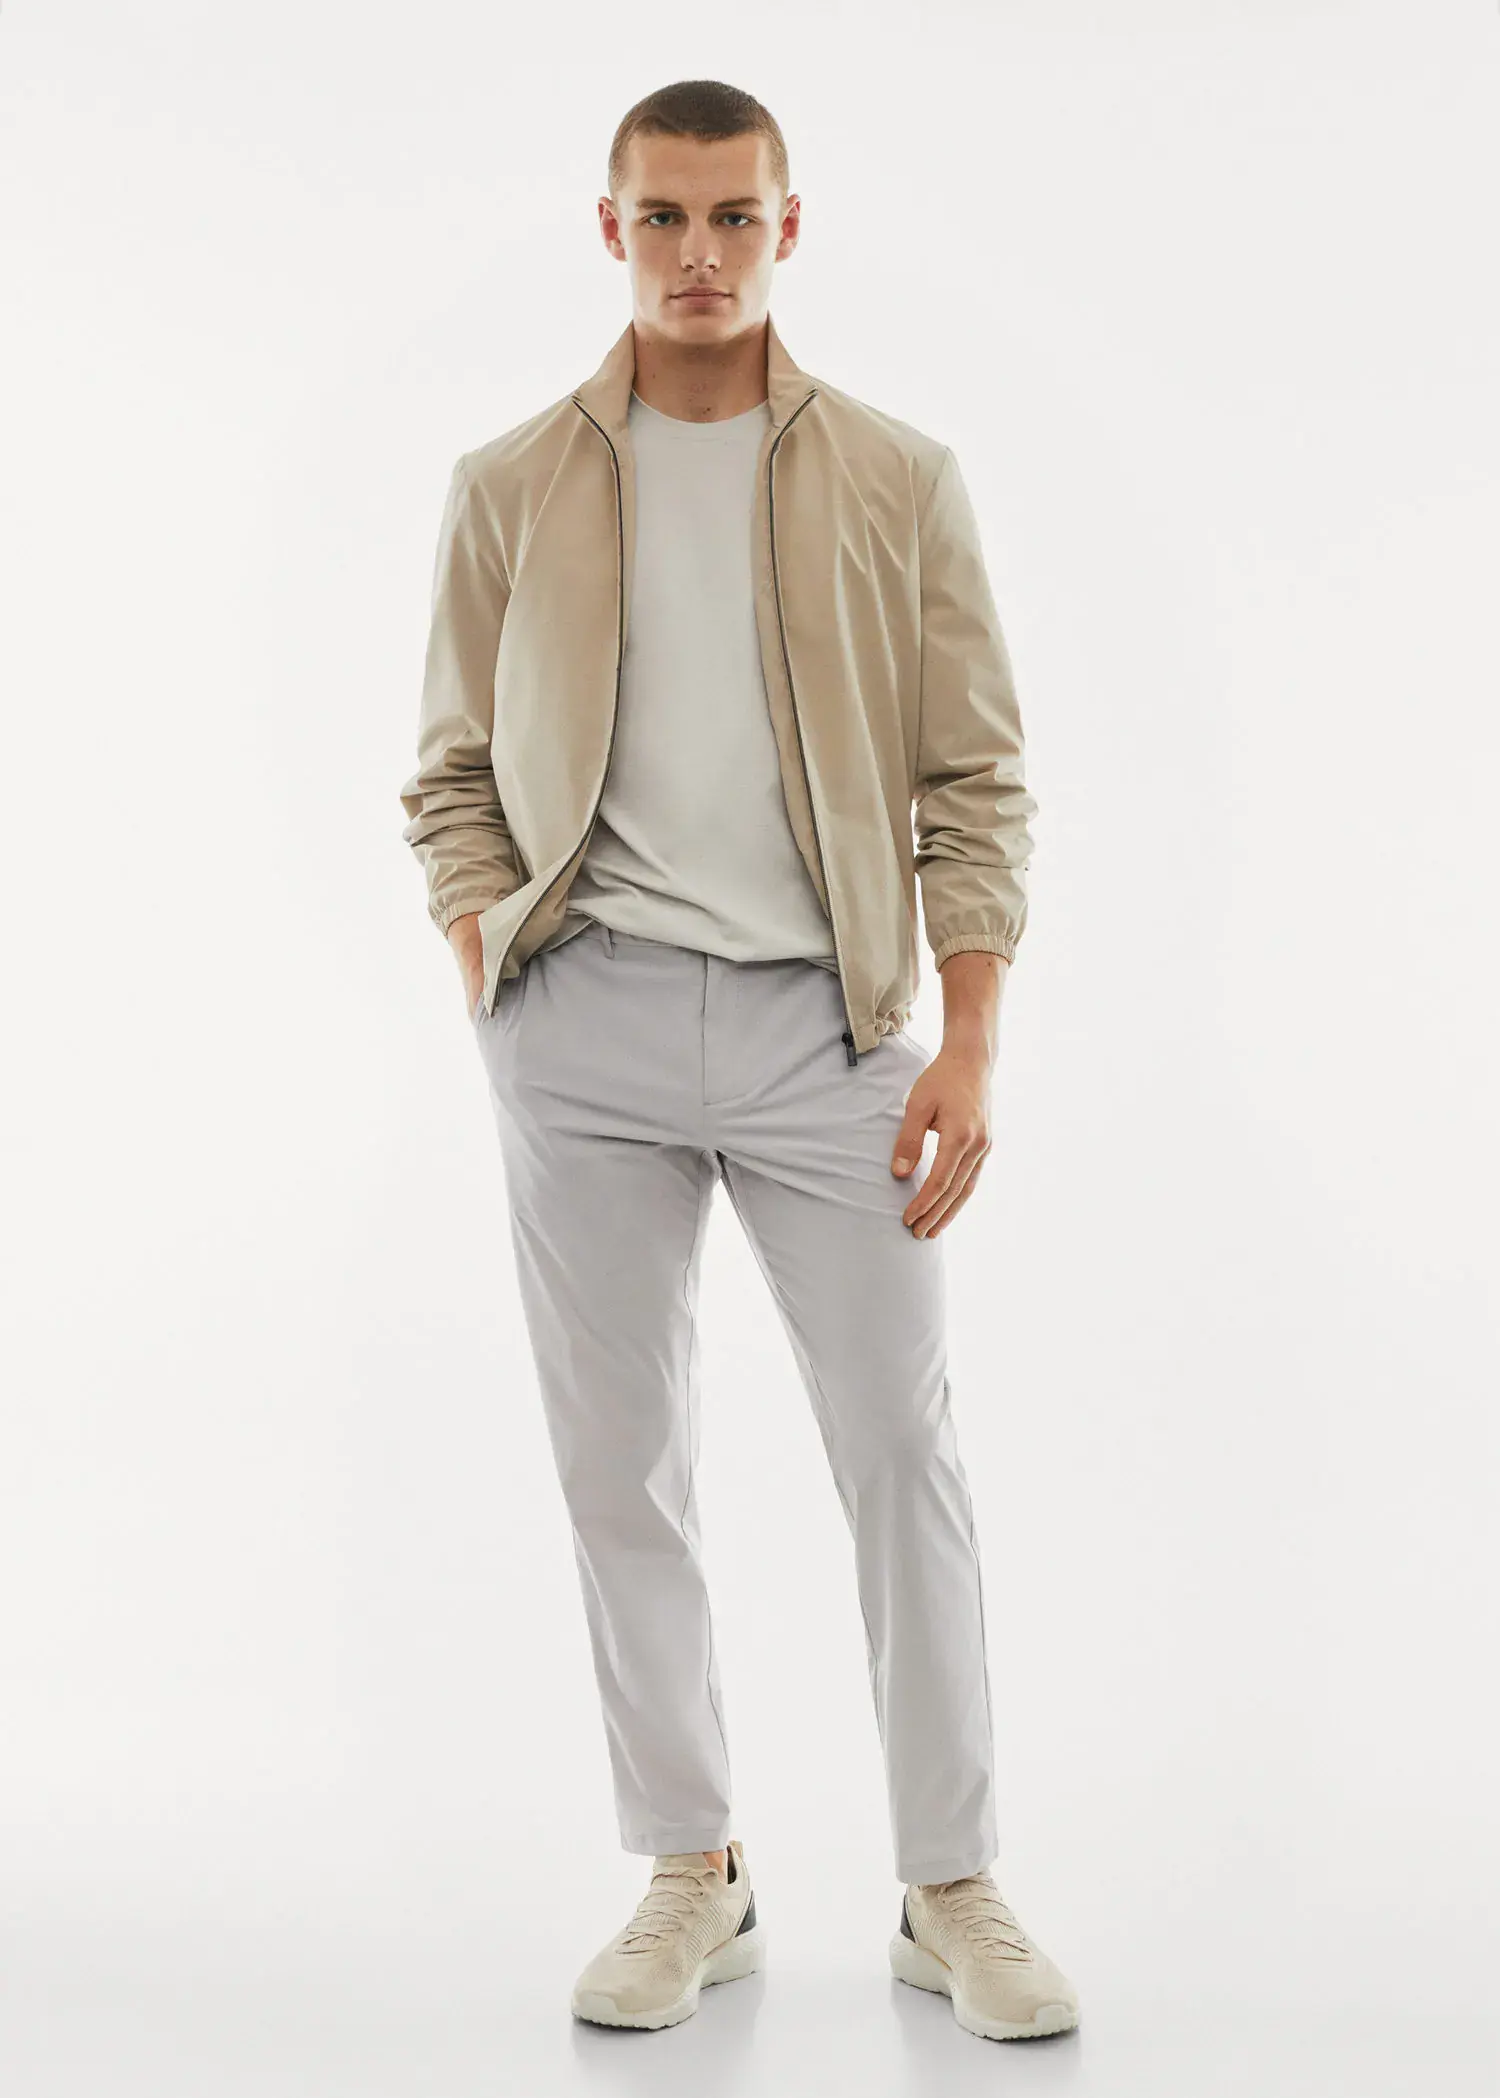 Mango Water-repellent technical trousers. a man in a tan jacket and white shirt. 